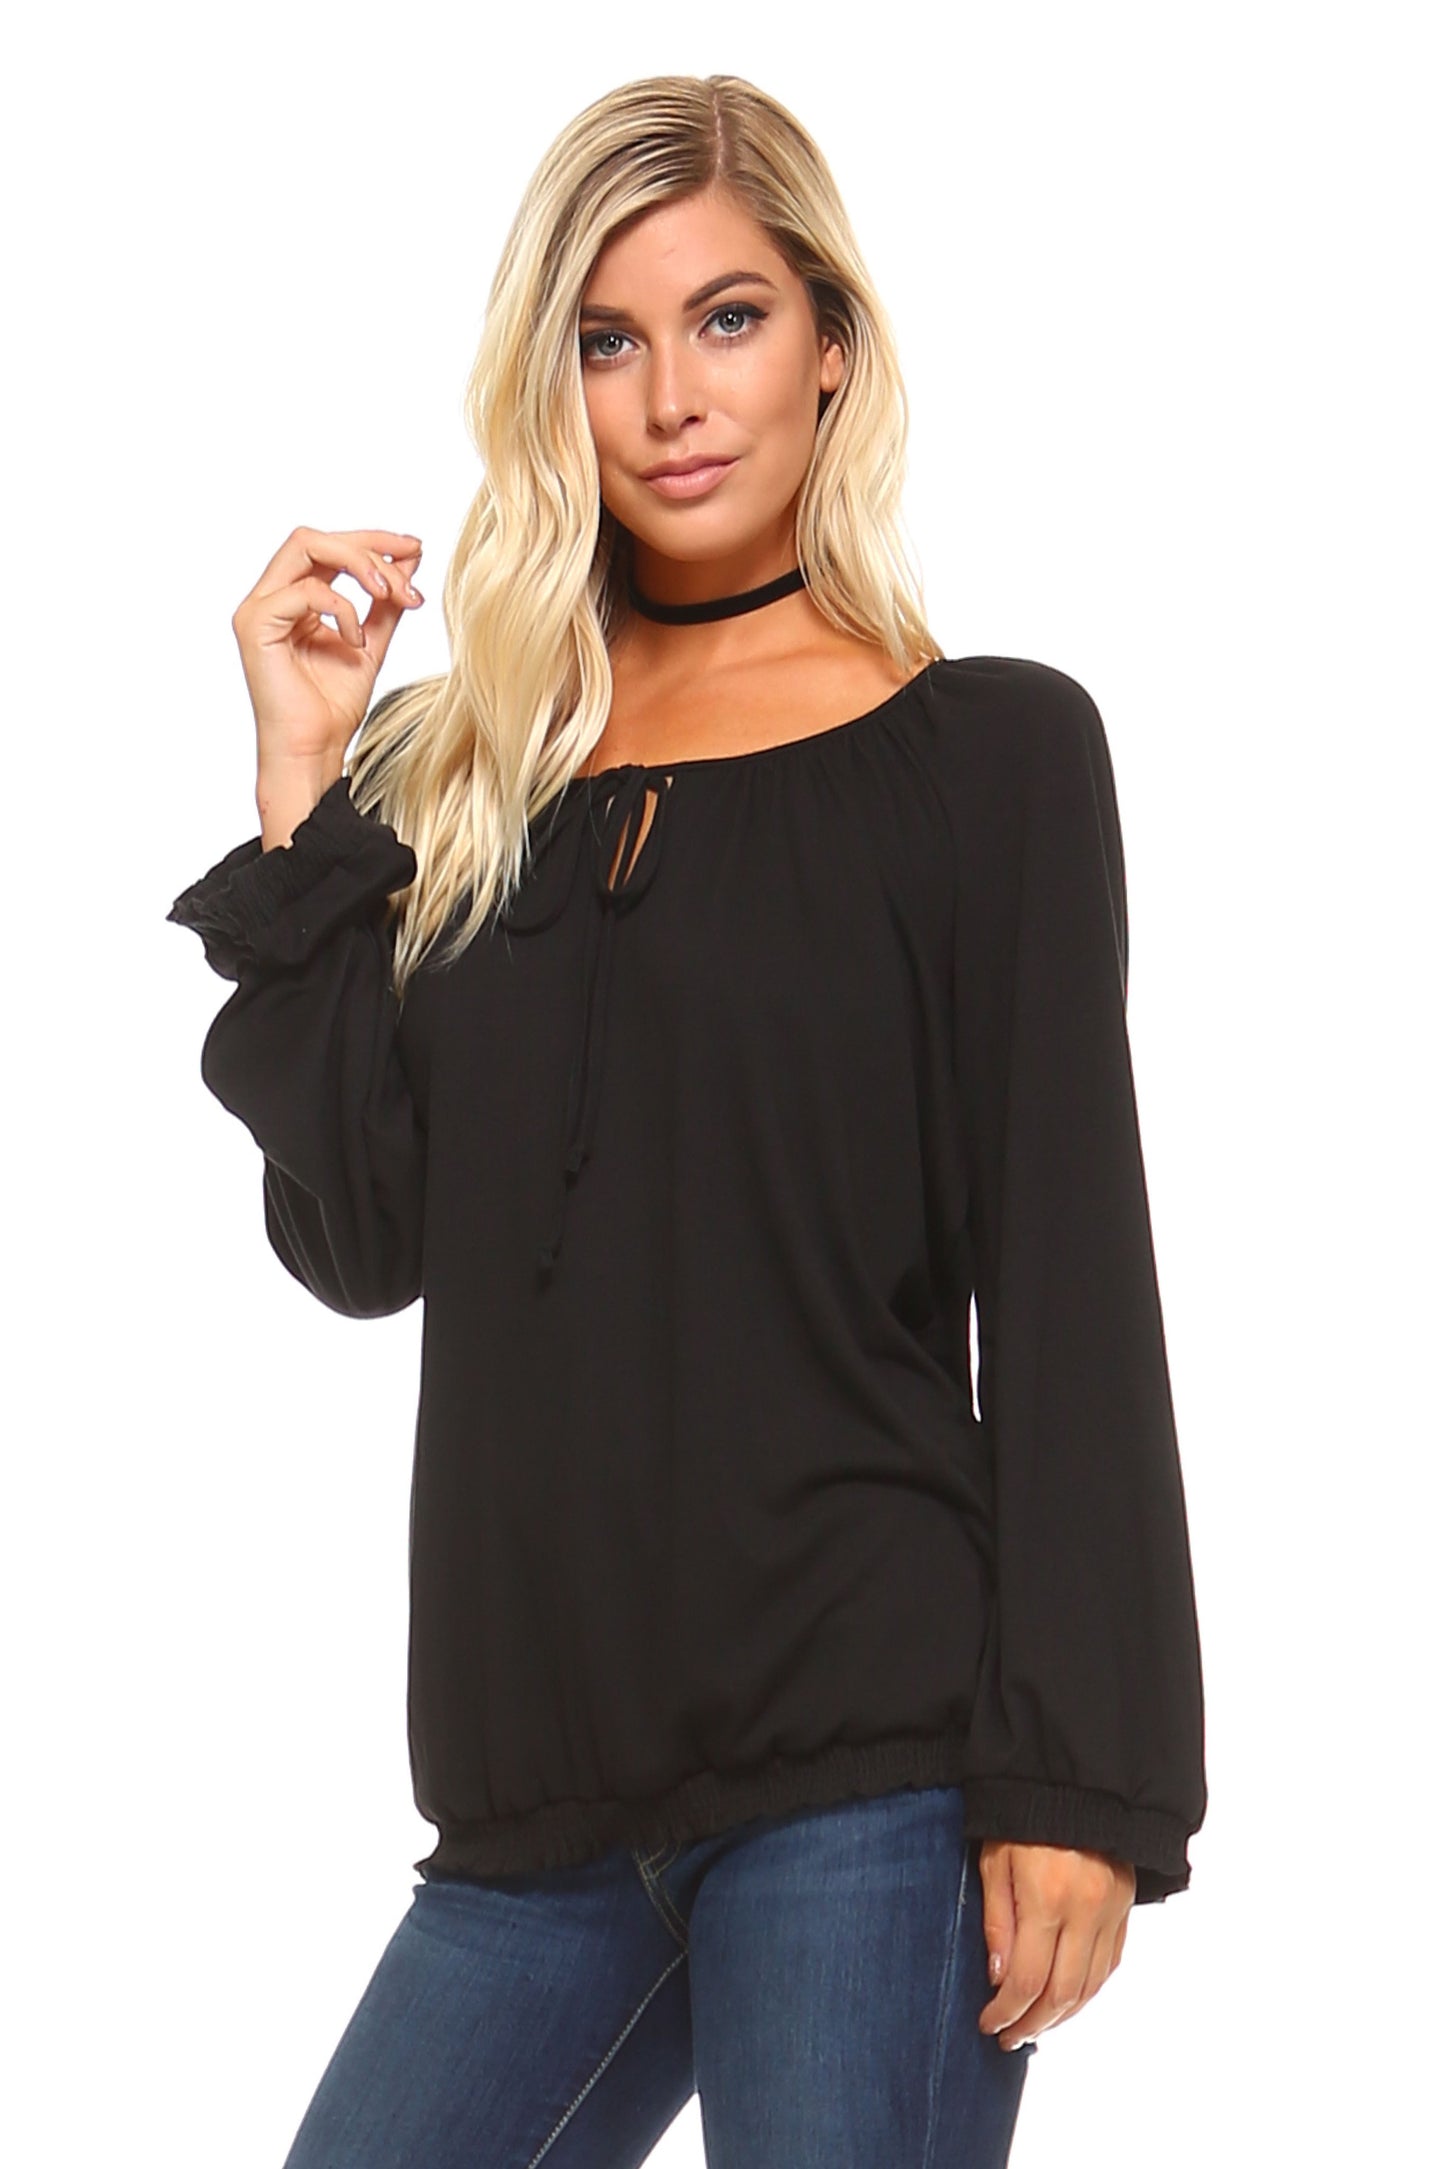 Women's Long Sleeve Solid Peasant Top (Sale Price: $33.15 CAD)